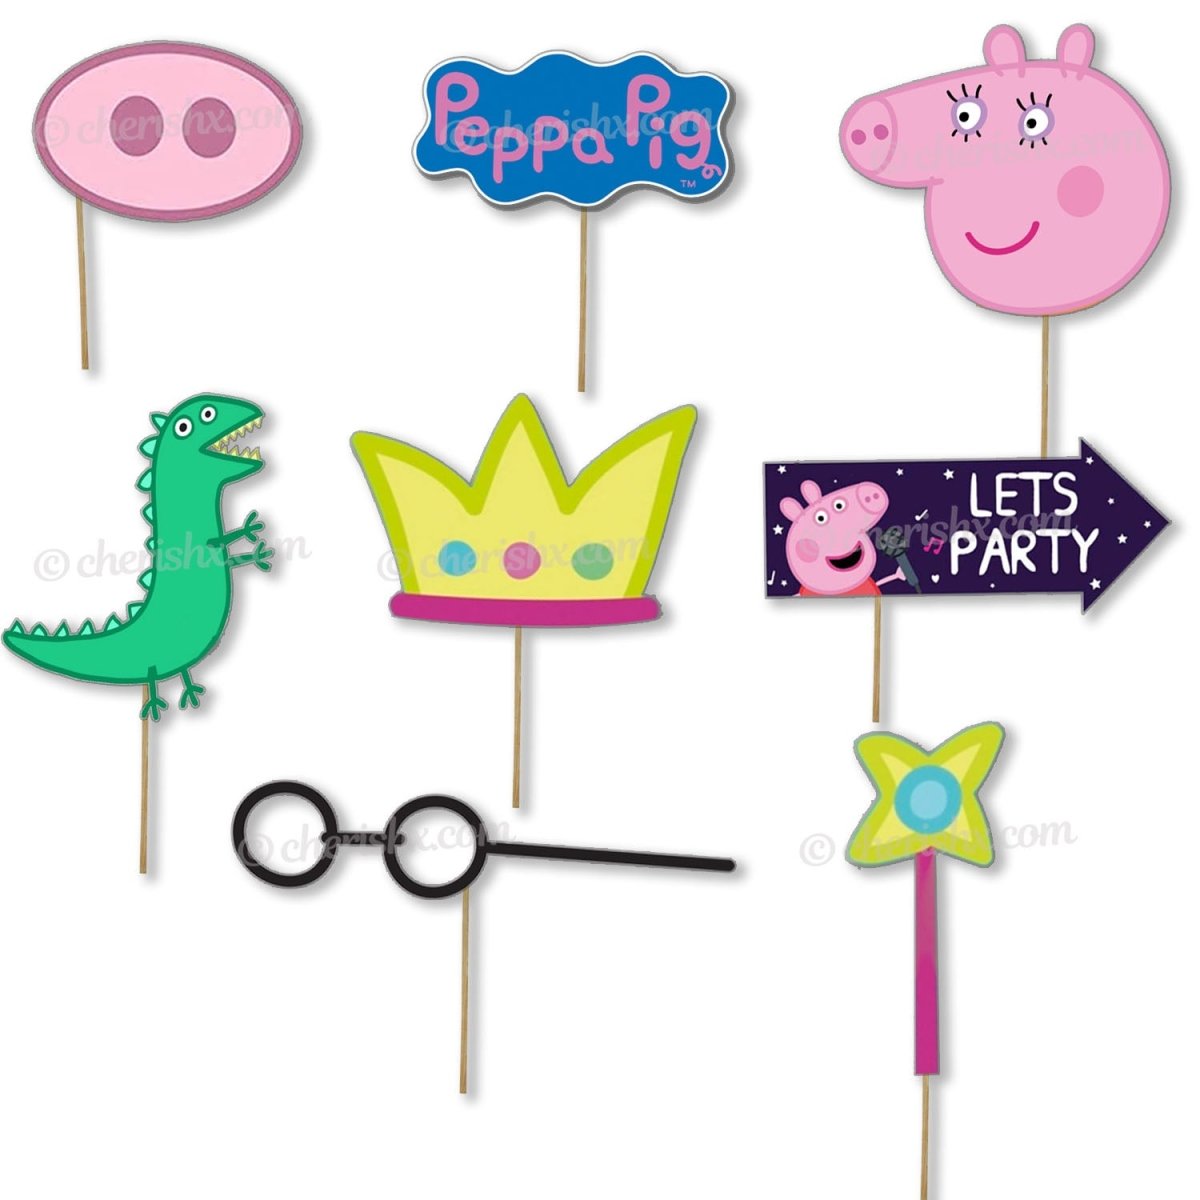 Peppa Pig Theme Photo Booth Party Props freeshipping - CherishX Partystore